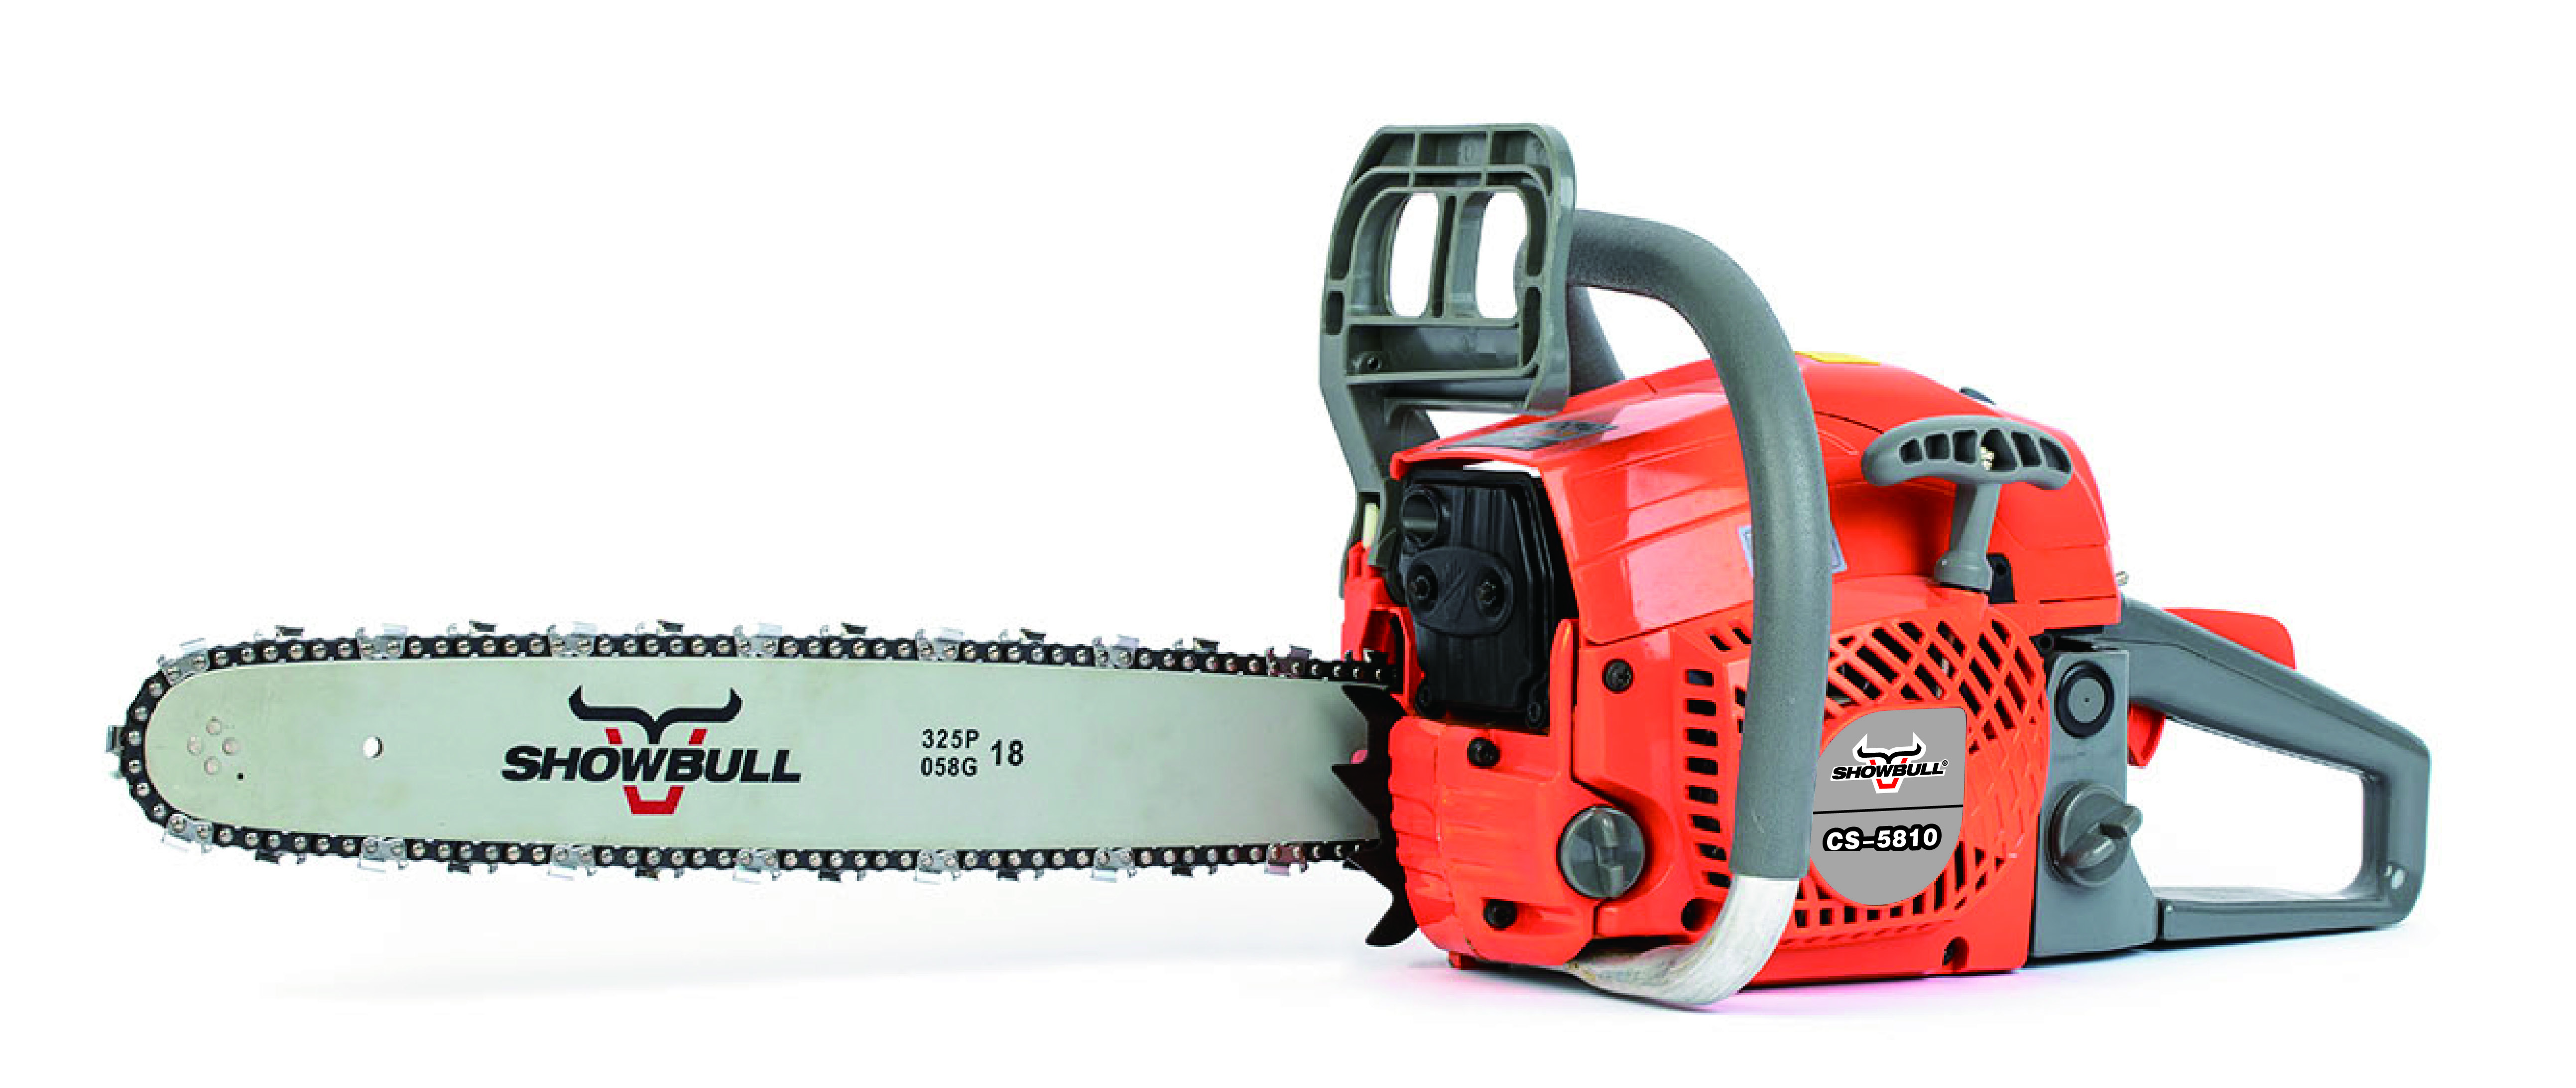 Gasoline Chainsaw for Wood Cutting, Chainsaw Manufacturers in China